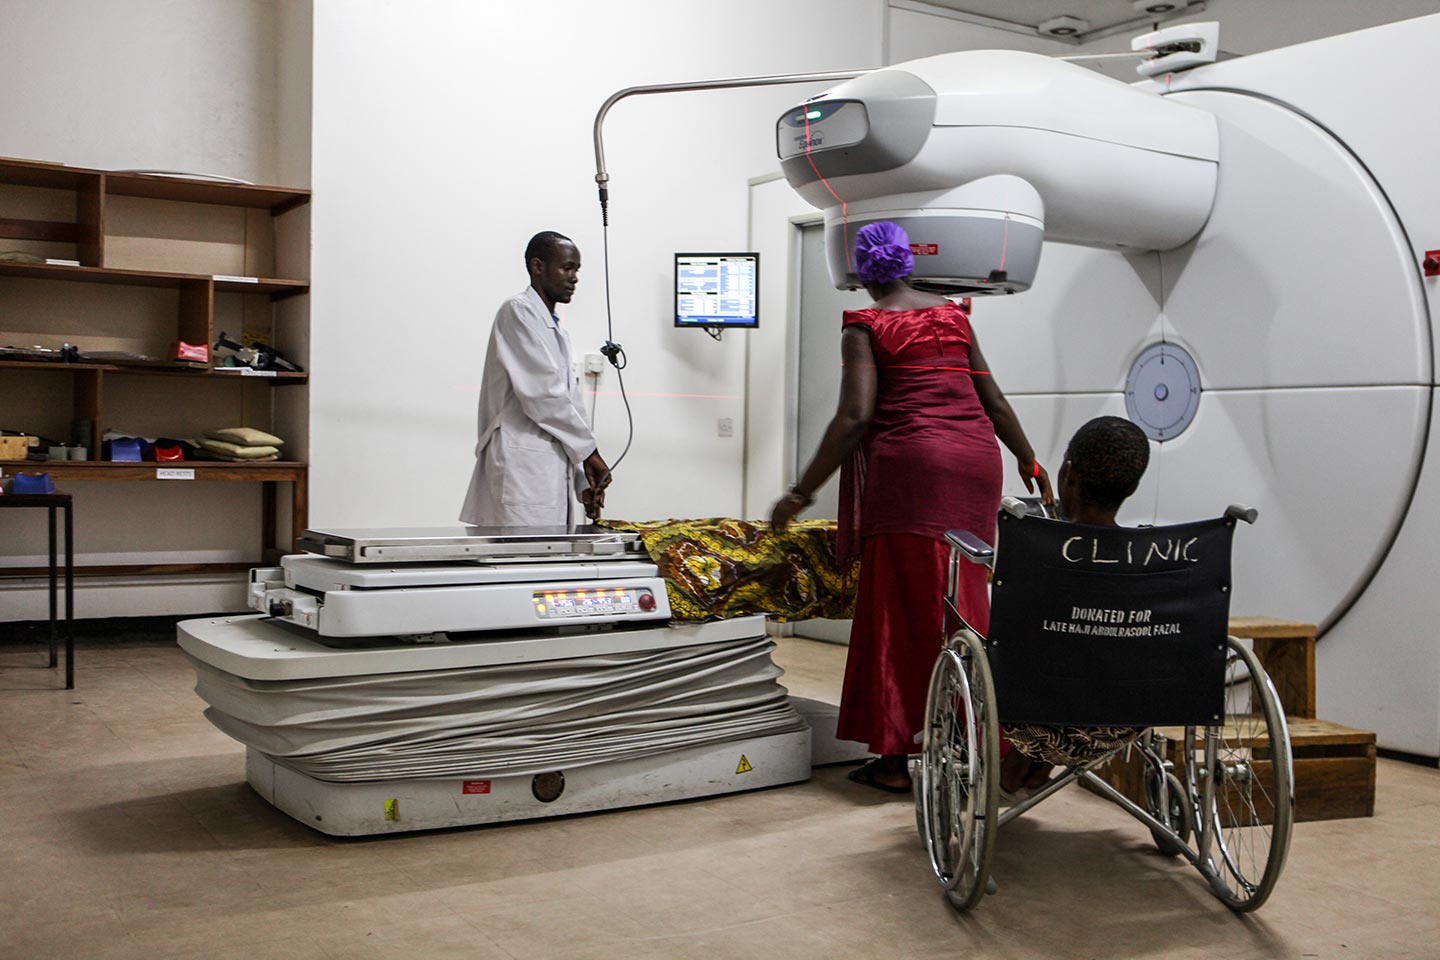 A cancer patient getting prepared for an examination – Credit: Gavi/2012/Sala Lewis